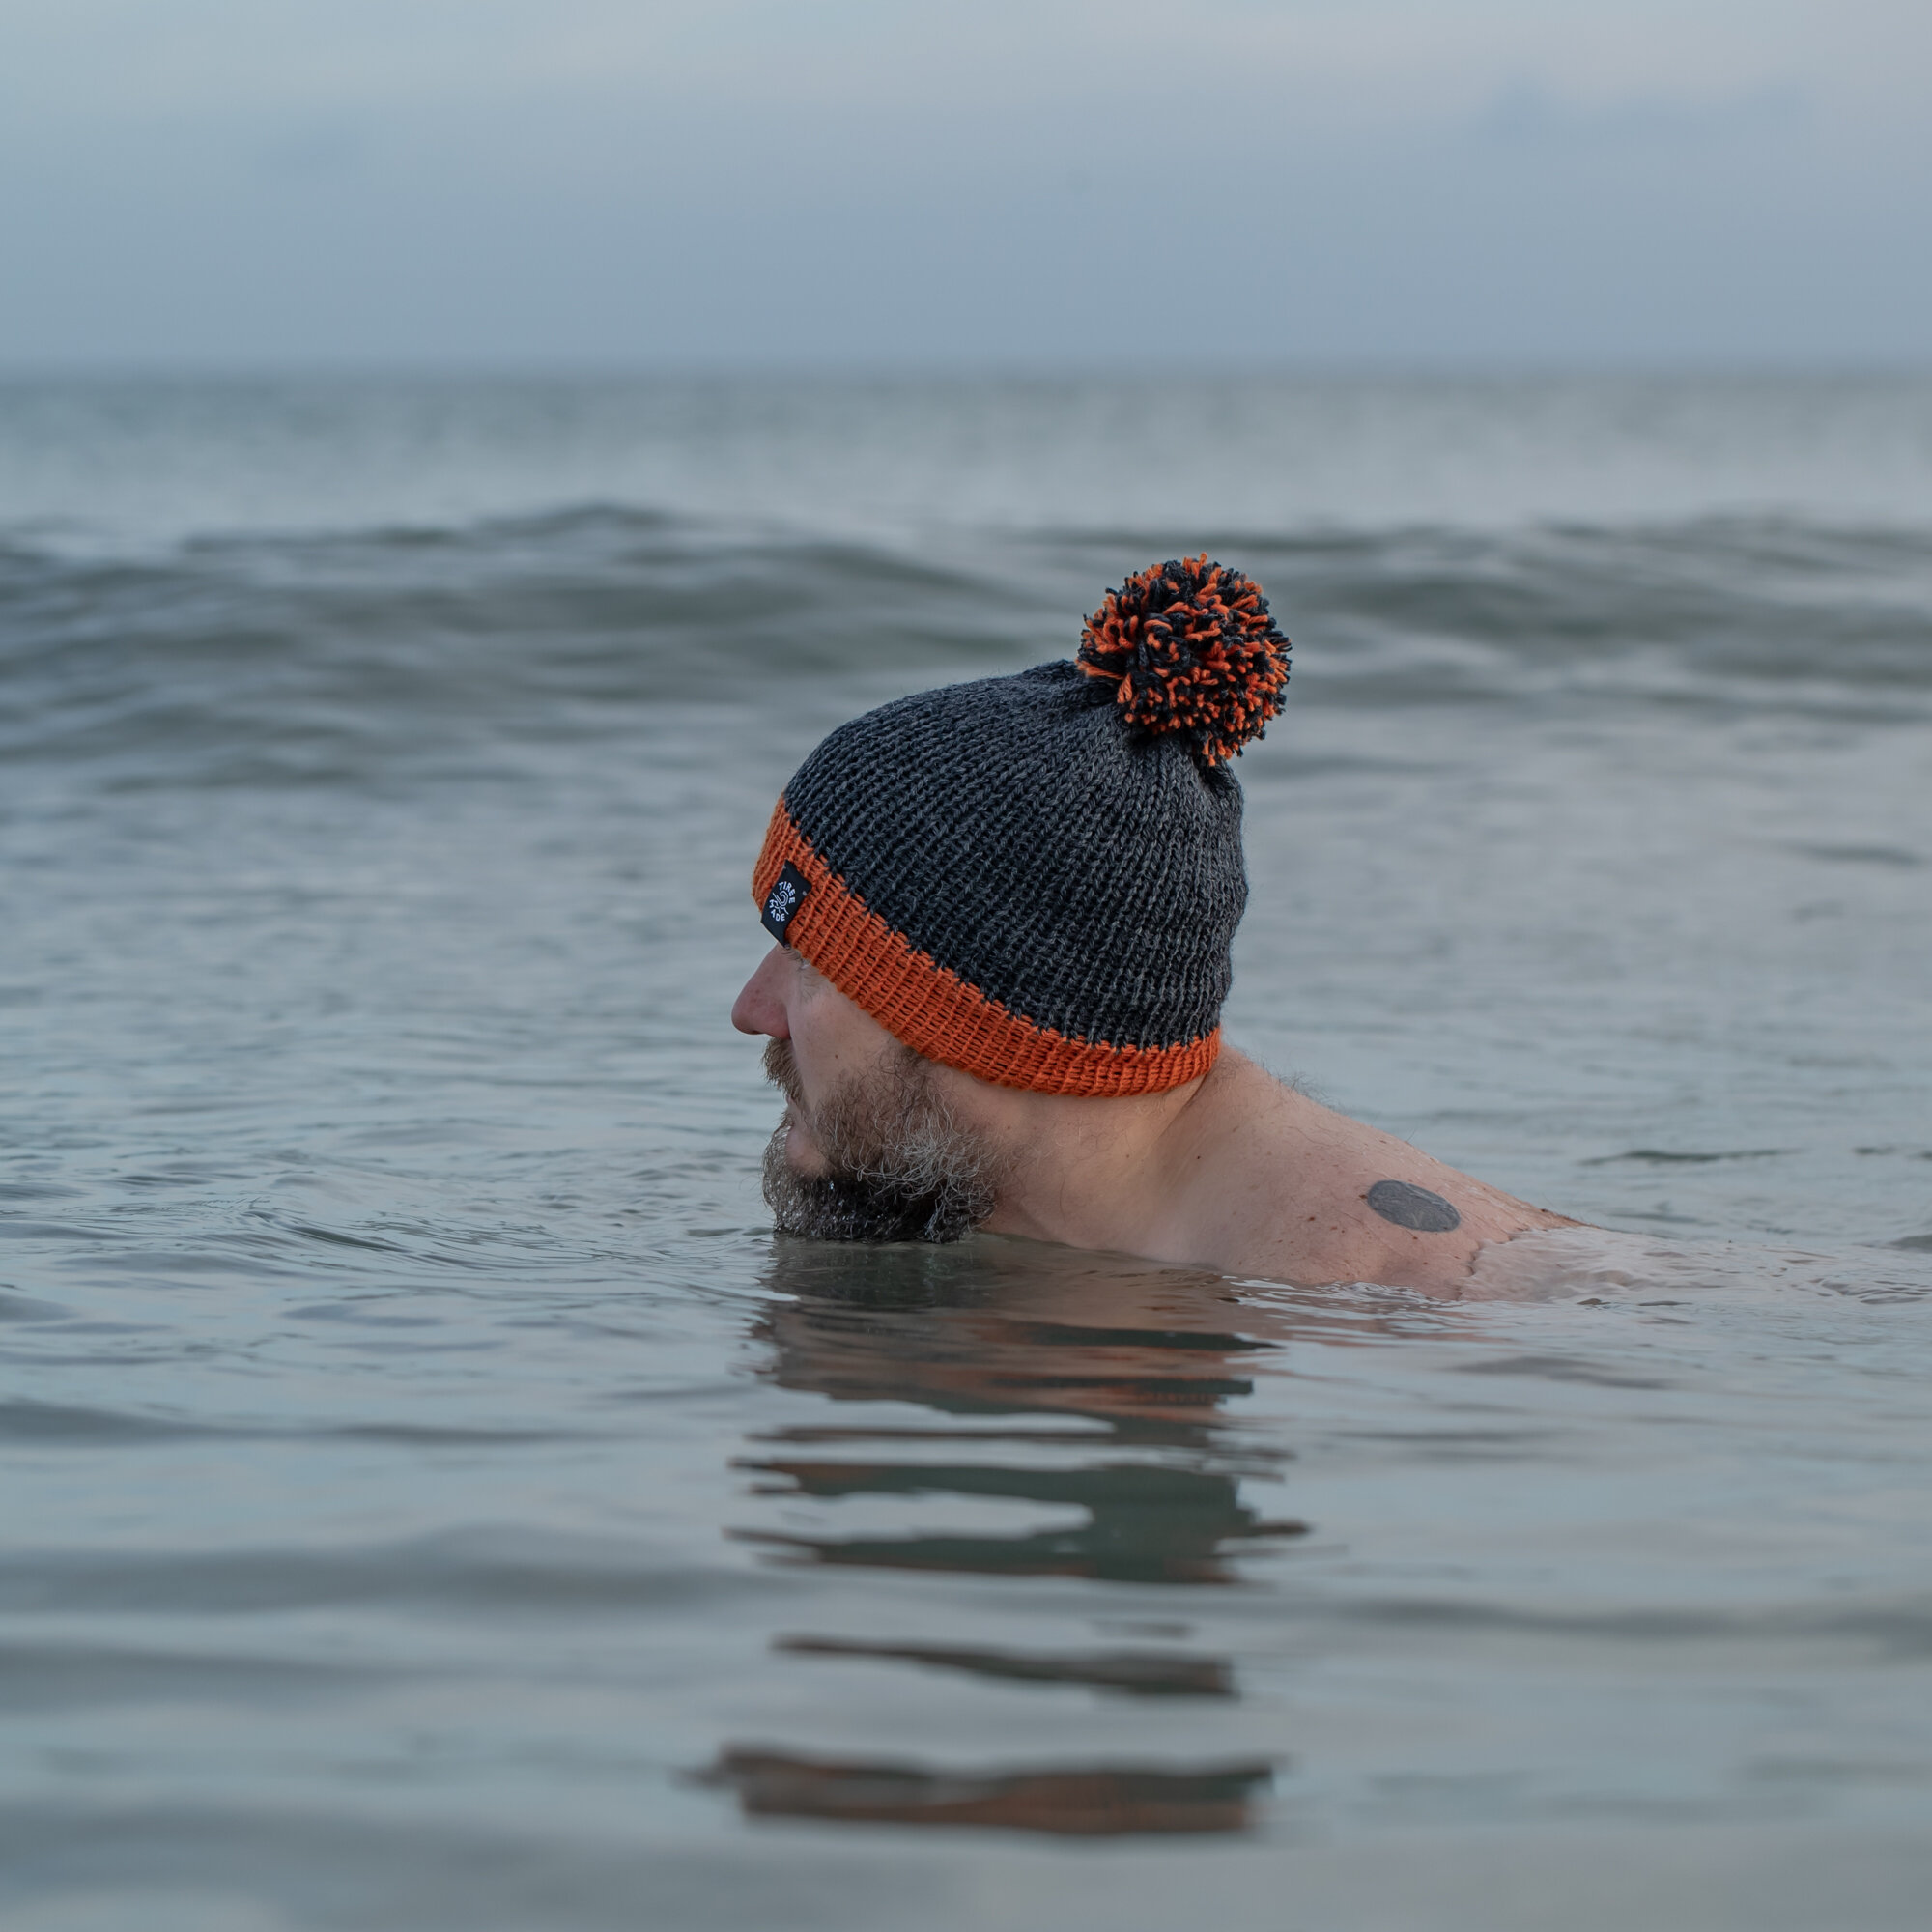 How To Keep Your Head Warm Wild Swimming: A Solution That Really